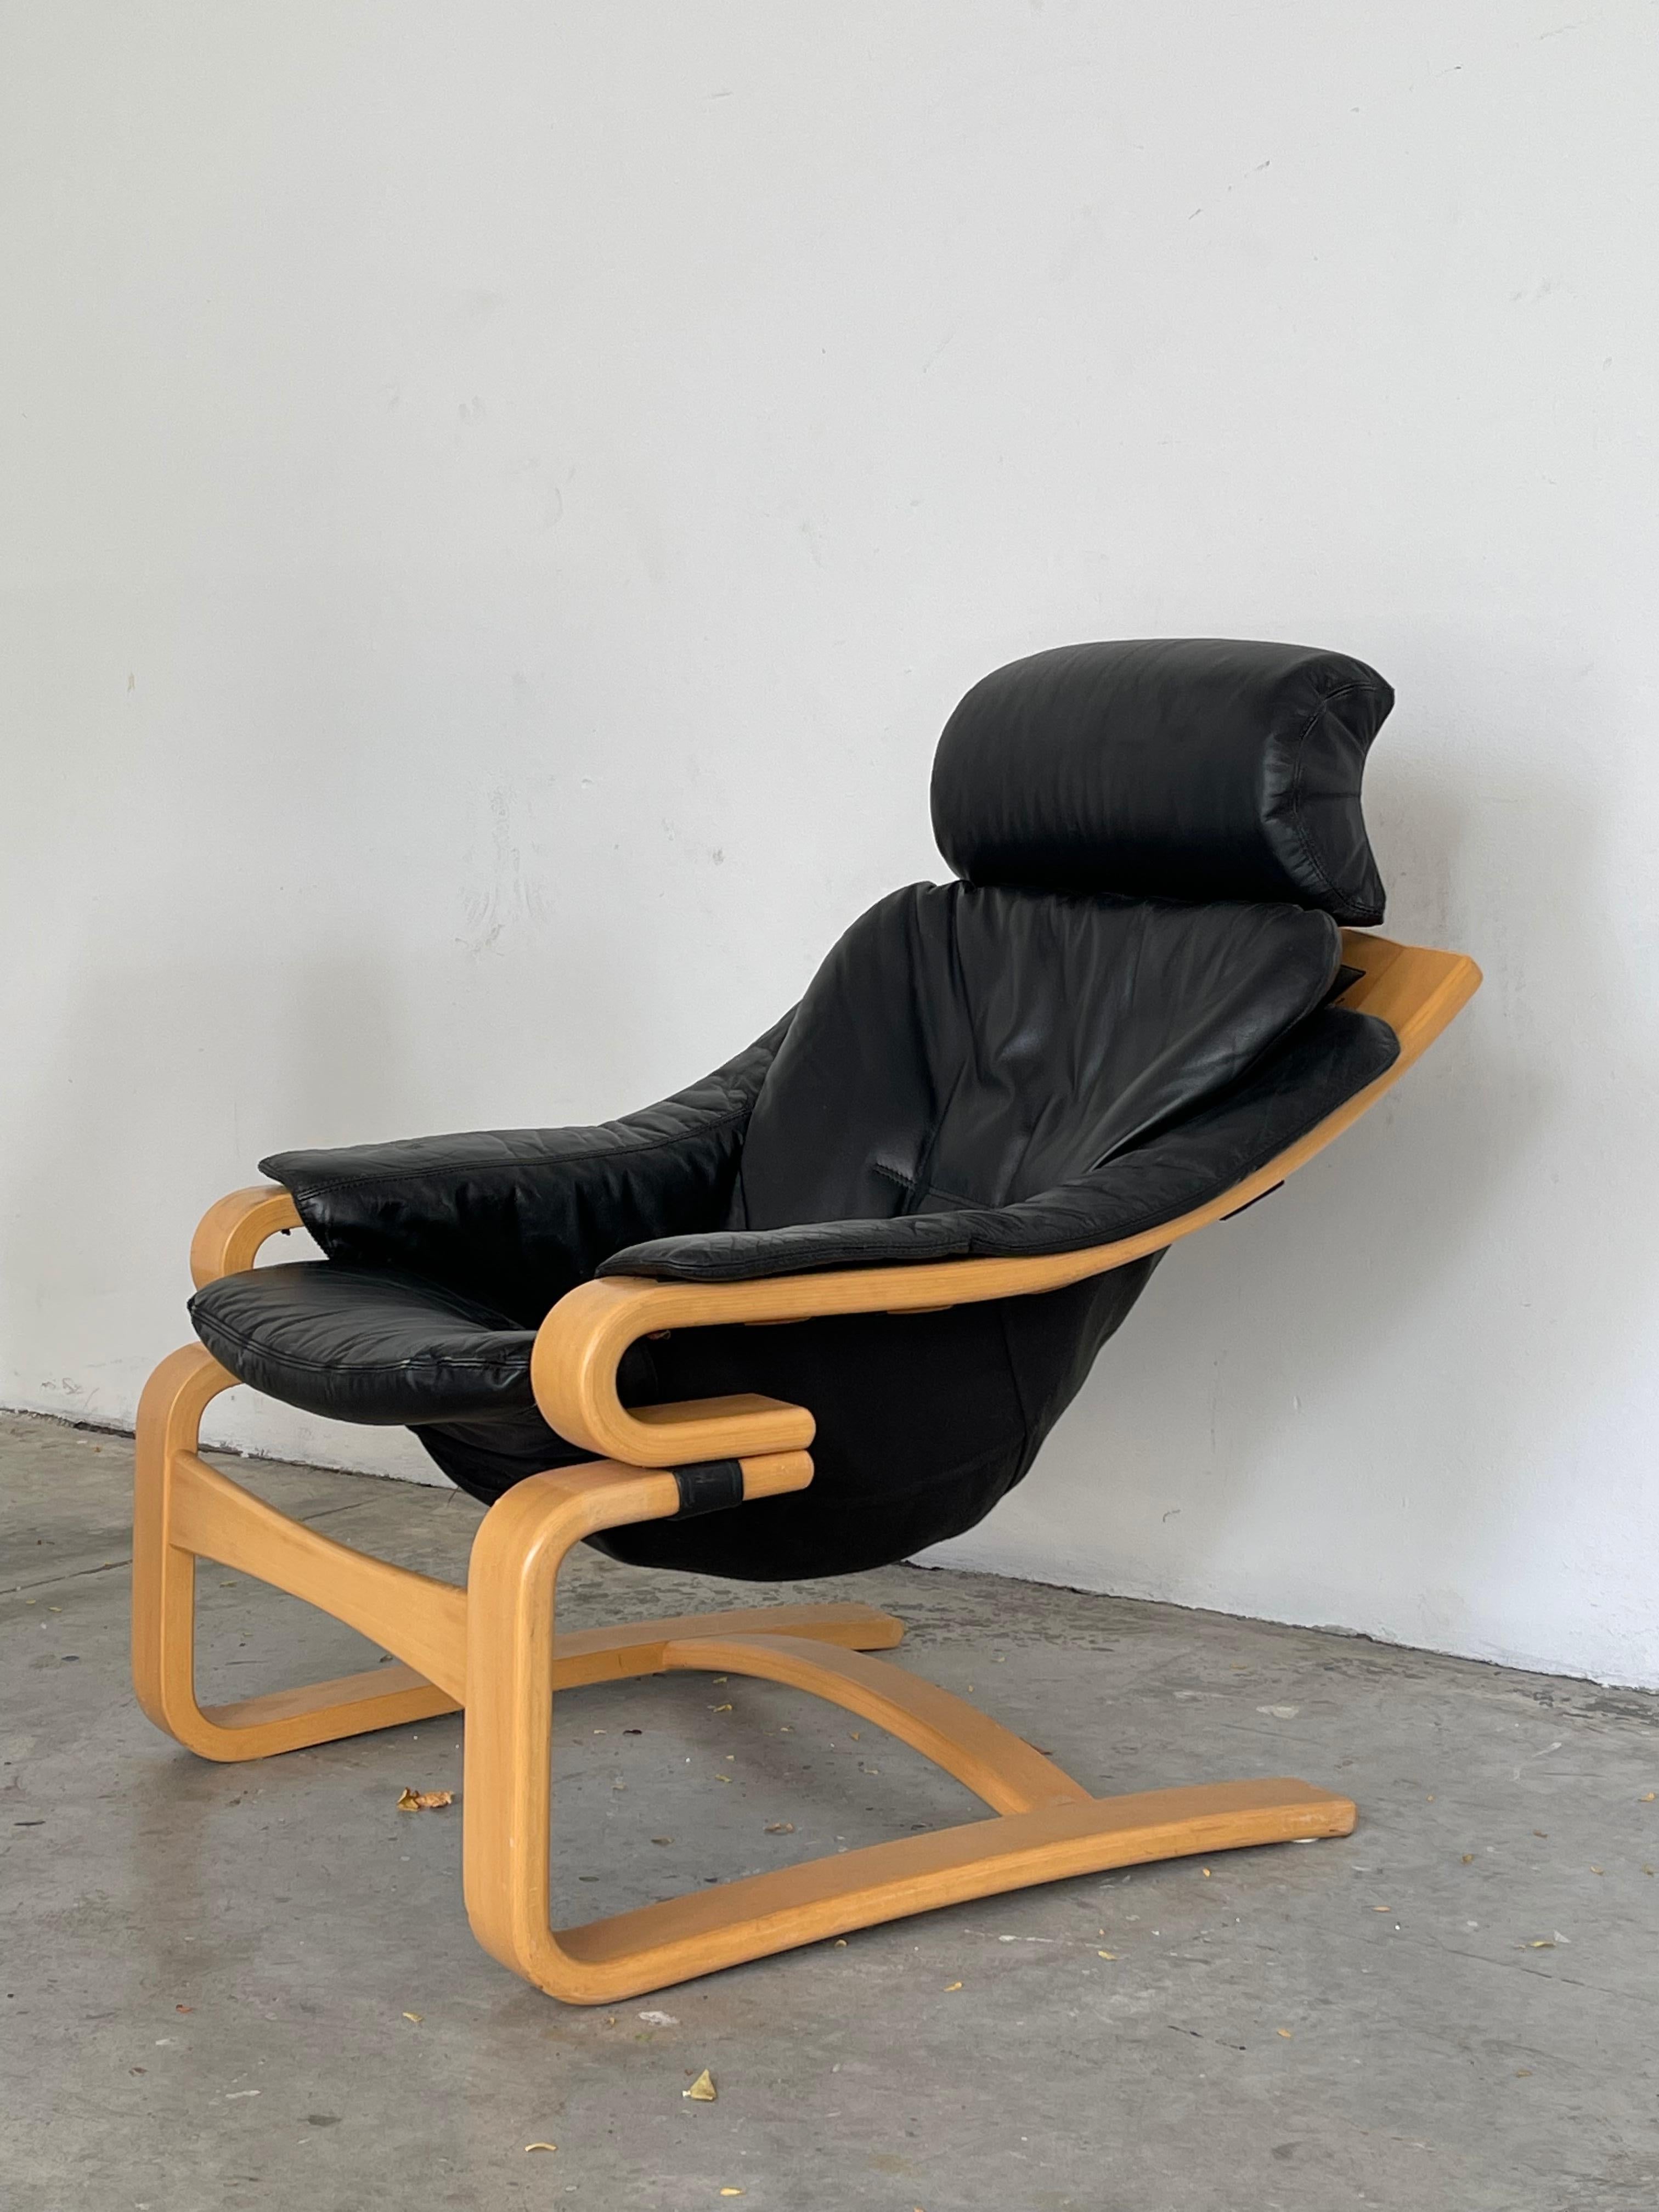 The 1970's Svend Skipper ?'style' Apollo chair and ottoman for Skippers Mobler was an iconic Scandinavian design made from a sturdy bent plywood frame and a canvas/faux leather bucket seat. It has a low cantilever profile with a comfortable body and